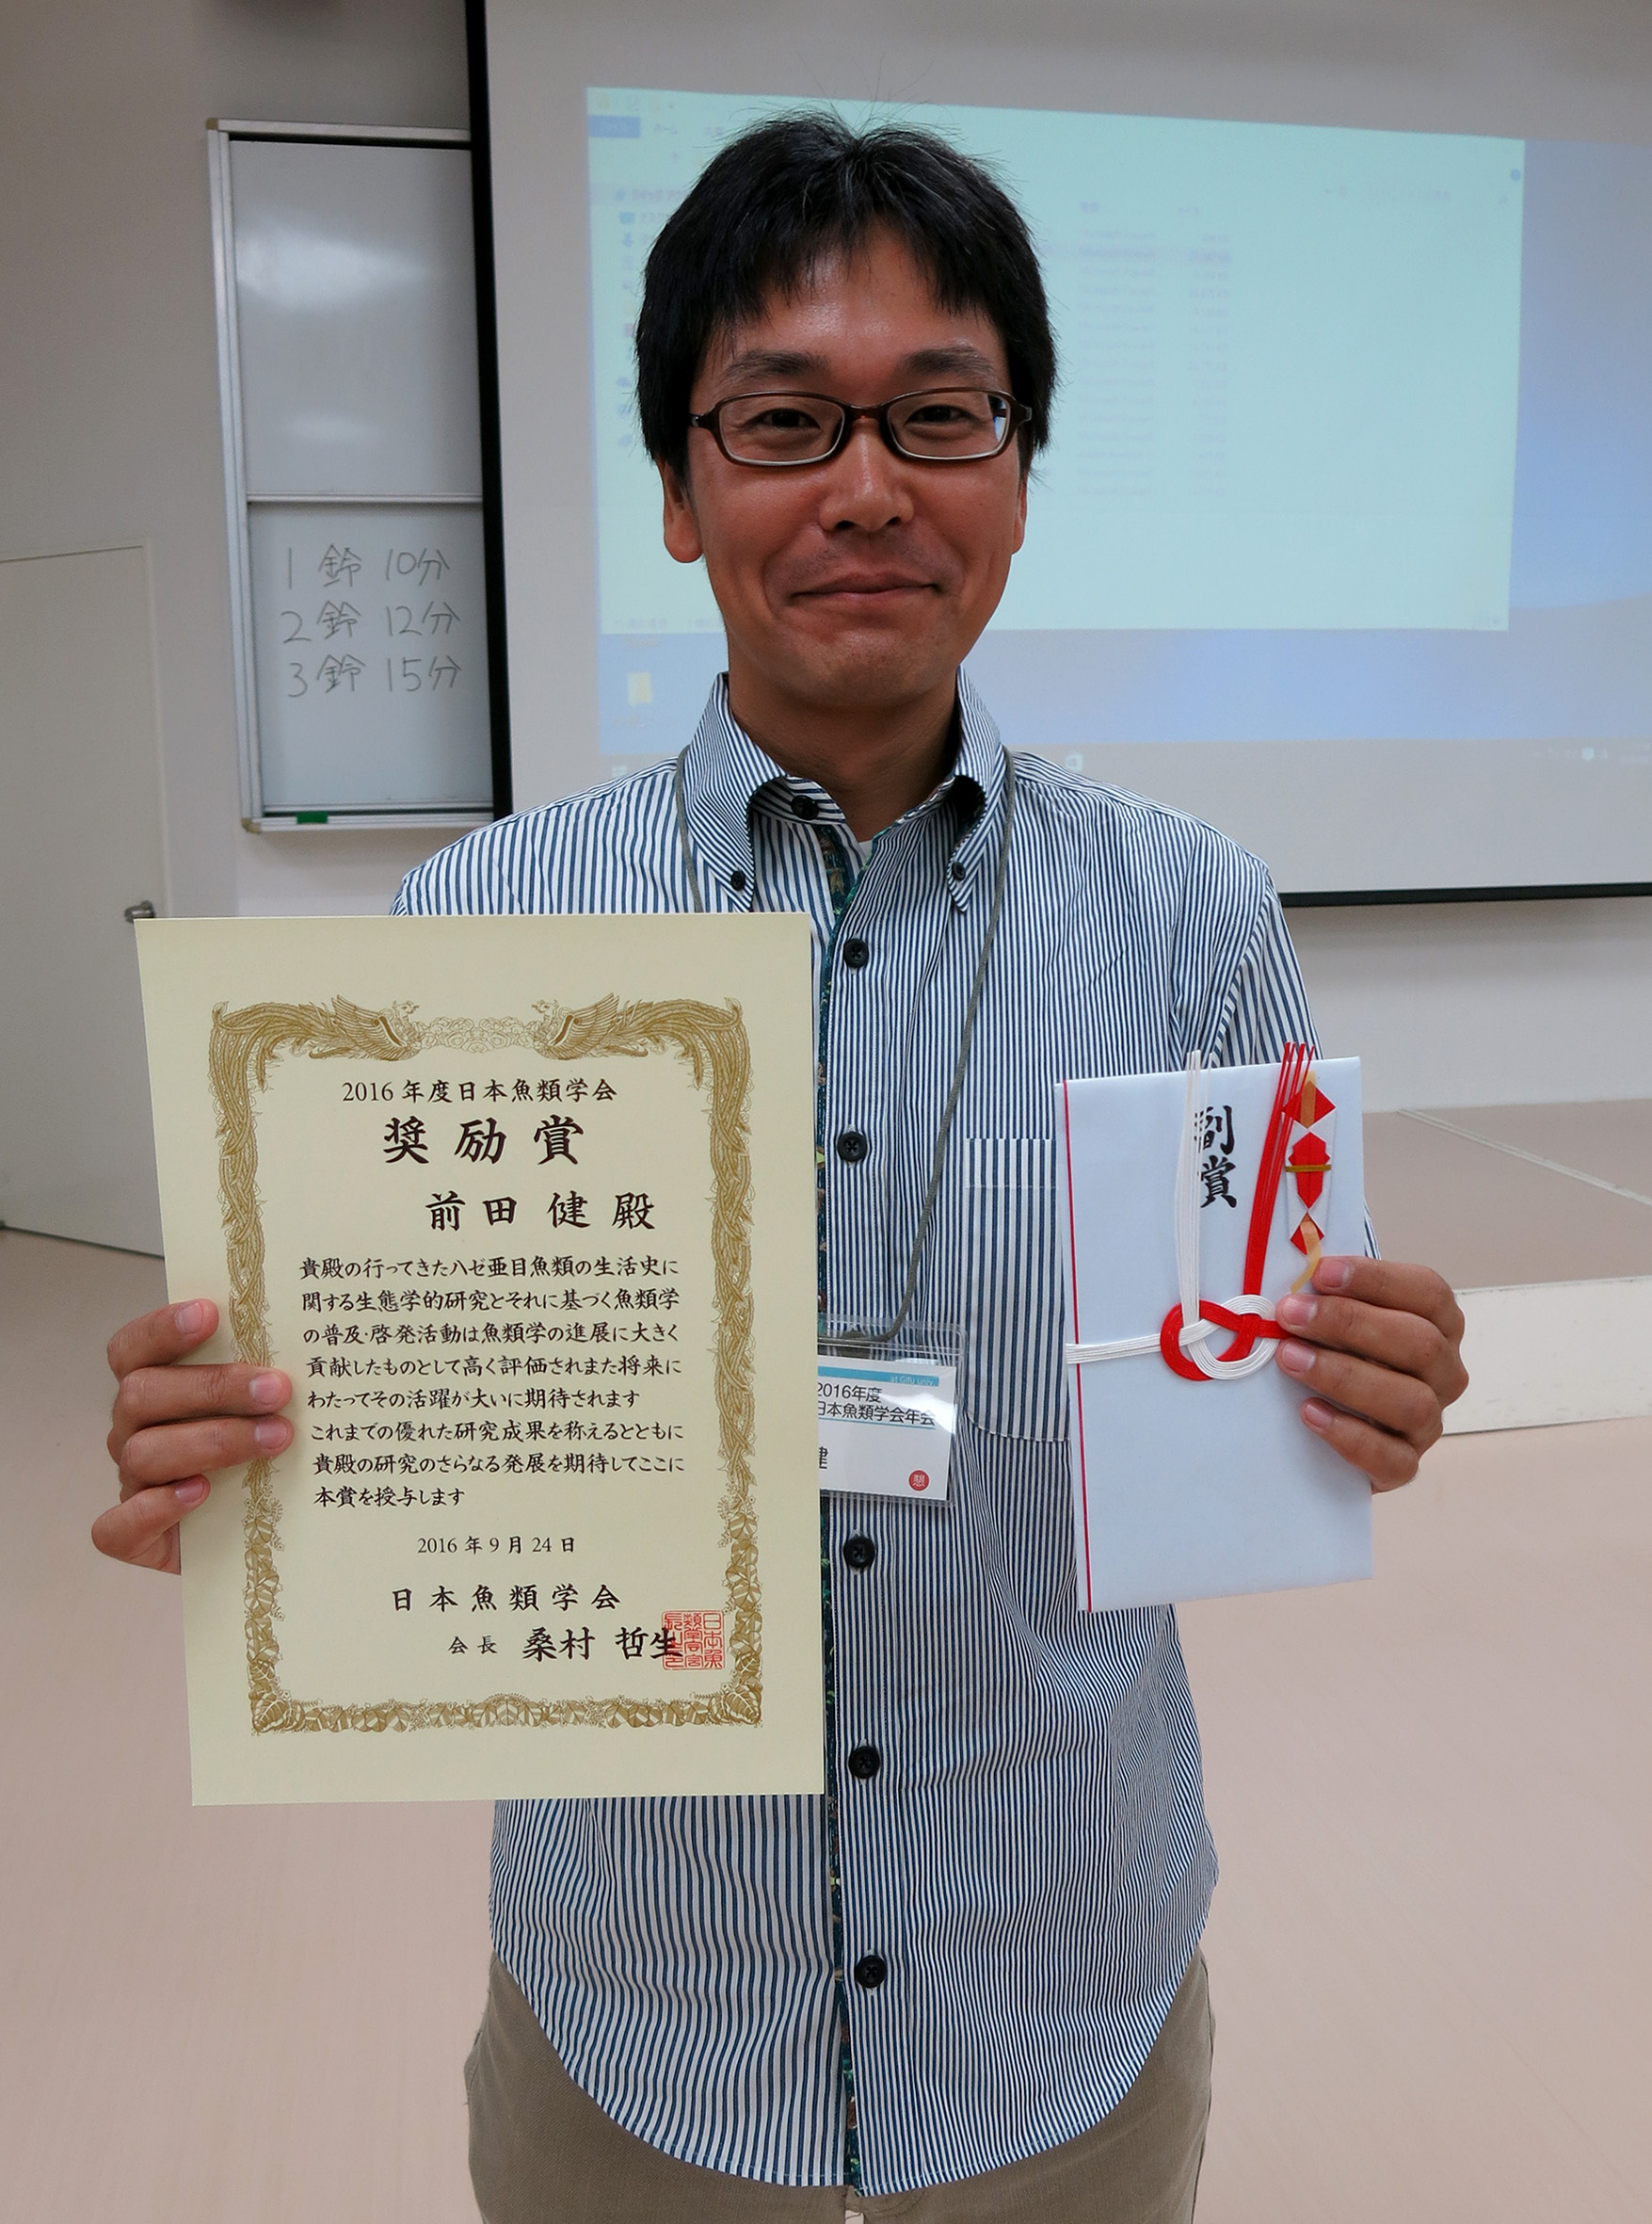 On September 24th, 2016, Ken Maeda, a researcher from OIST’s Marine Genomics Unit, received the Young Researcher Award from the Ichthyological Society of Japan